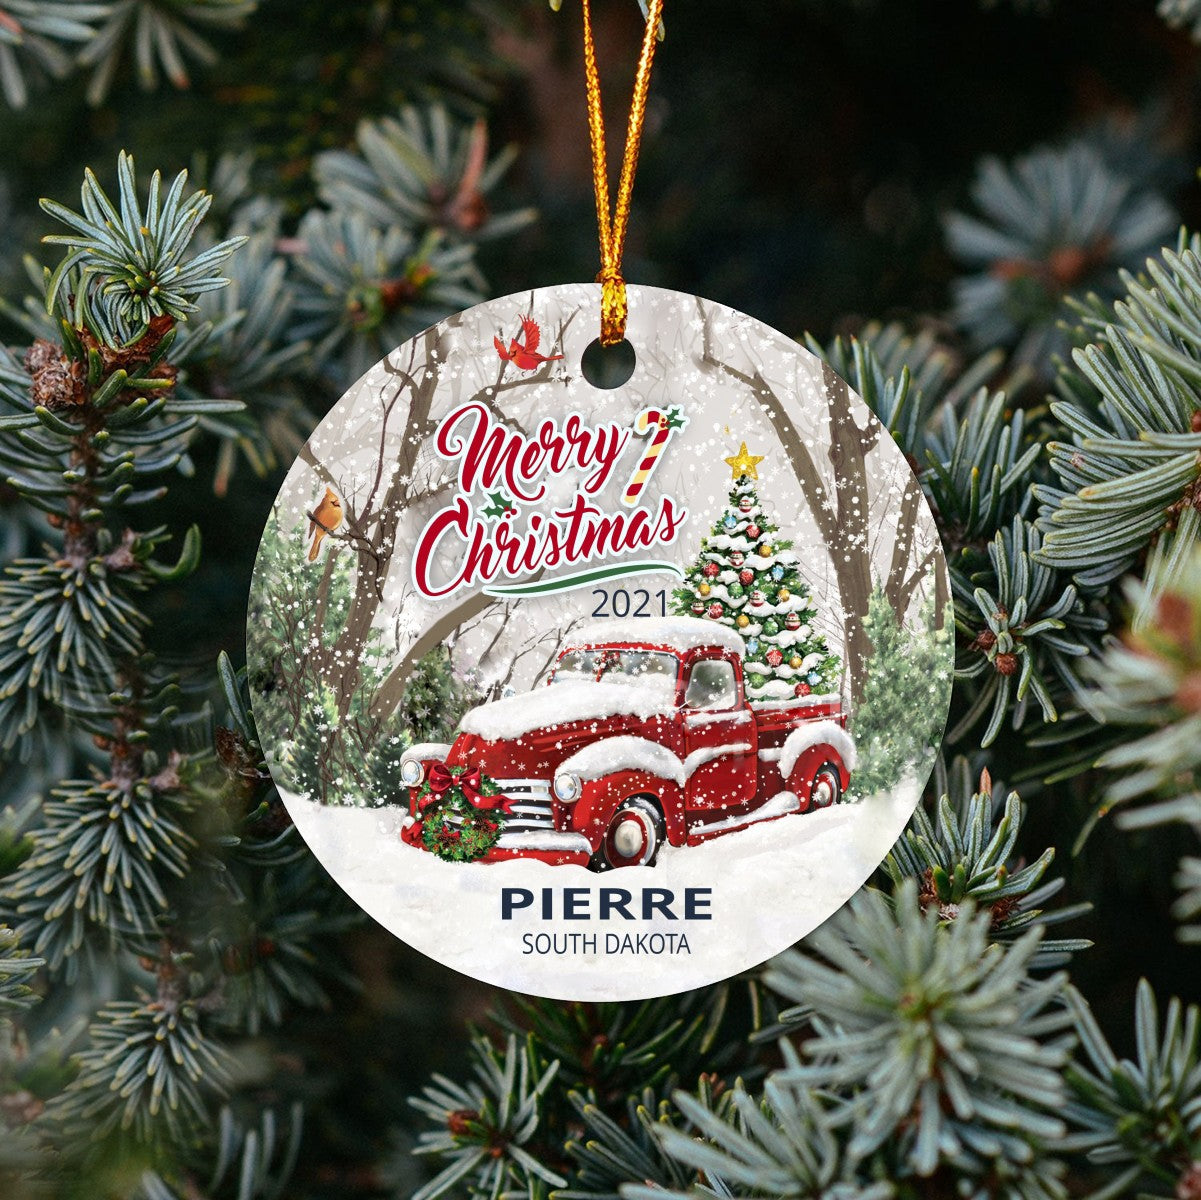 Christmas Tree Ornaments Pierre - Ornament With Name City, State Pierre South Dakota SD Ornament - Red Truck Xmas Ornaments 3'' Plastic Gift For Family, Friend And Housewarming